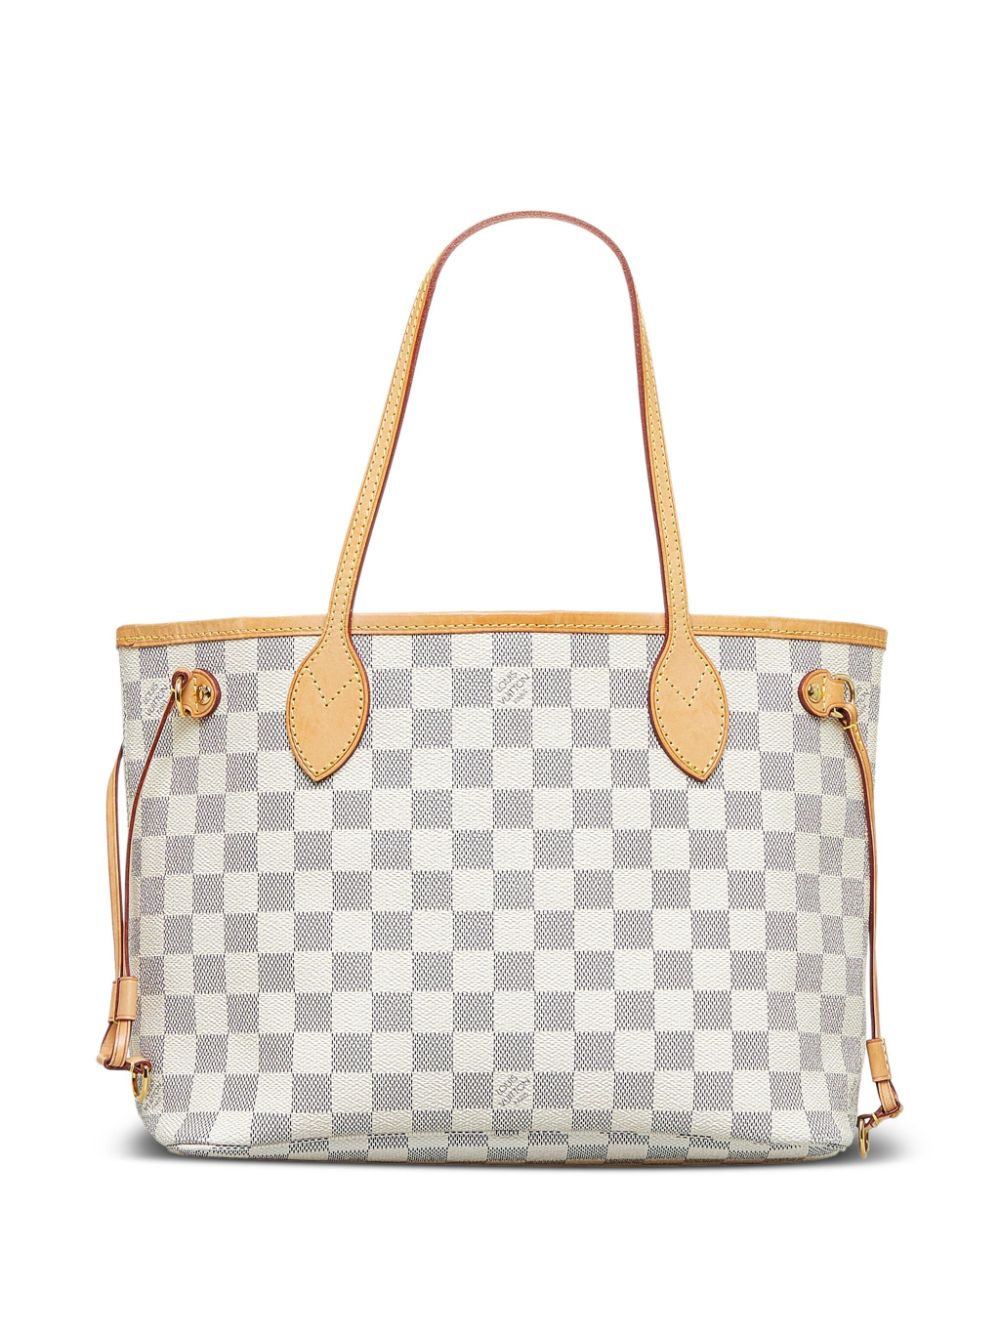 Louis Vuitton 2010 pre-owned Damier Ebene Neverfull PM Tote Bag